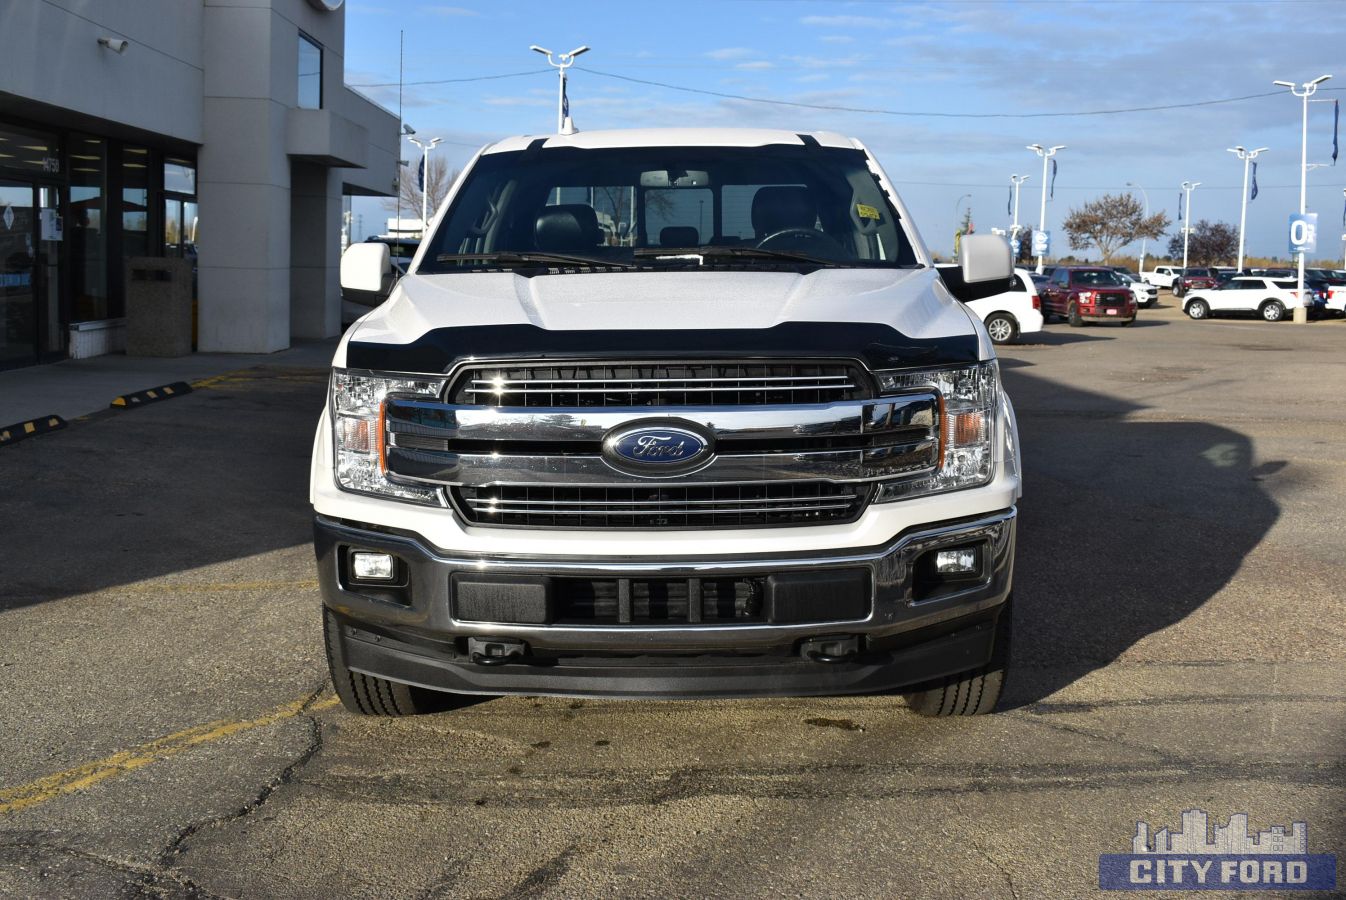 2018 Ford F-150 for sale in Edmonton, AB (1705280117) - The Car Guide 2018 F 150 Supercrew 5.0 Towing Capacity